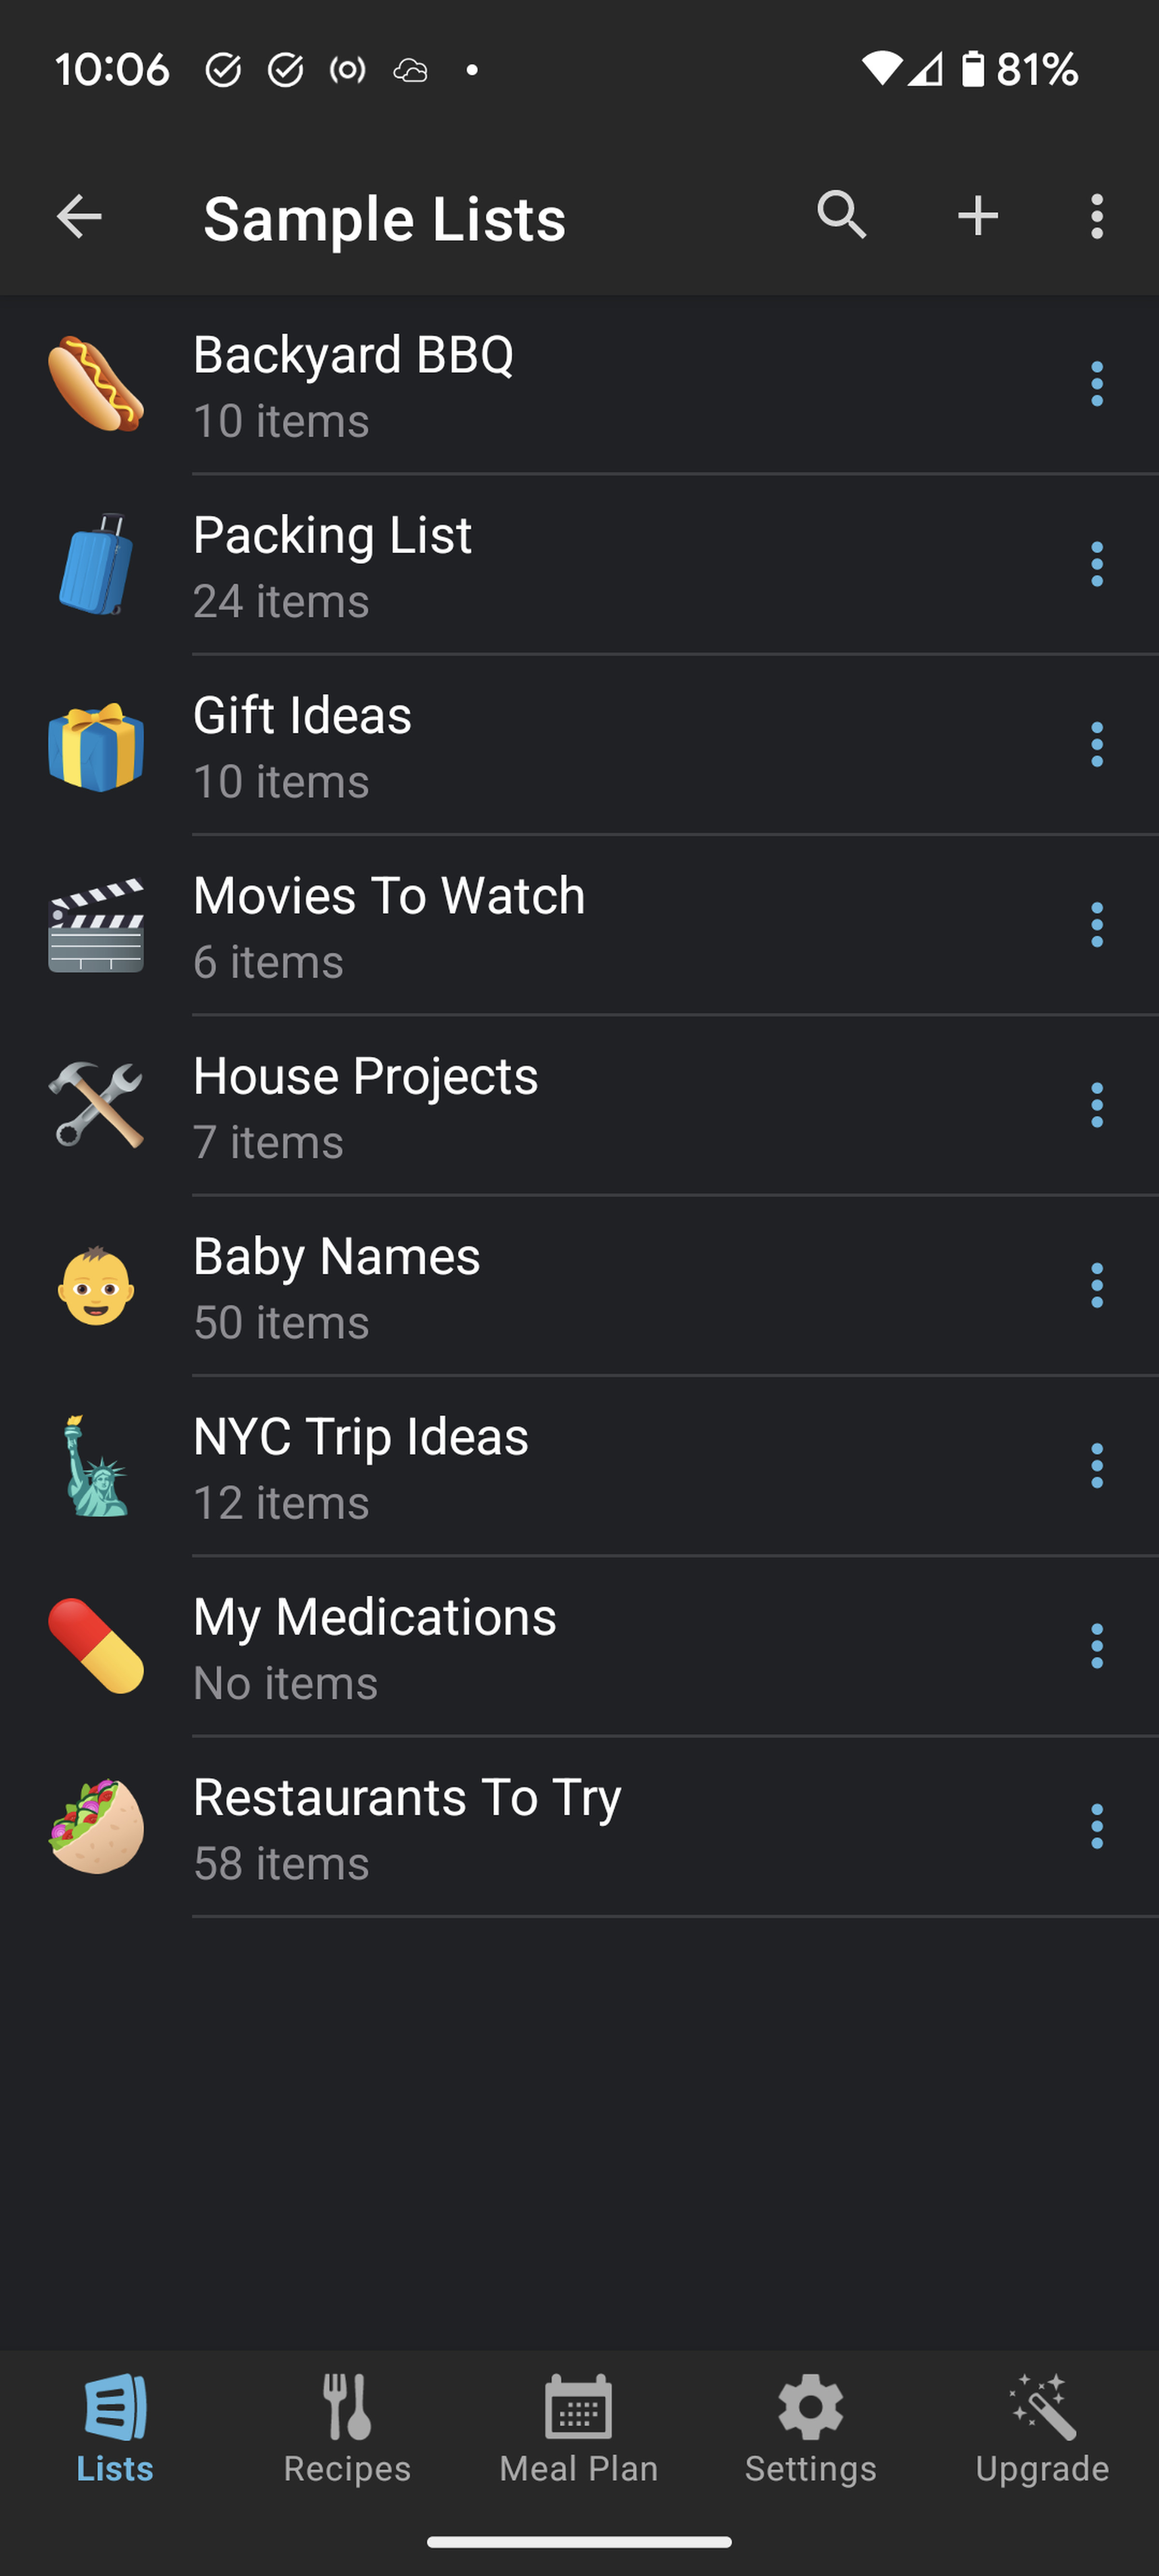 Sample lists from mobile app AnyList.